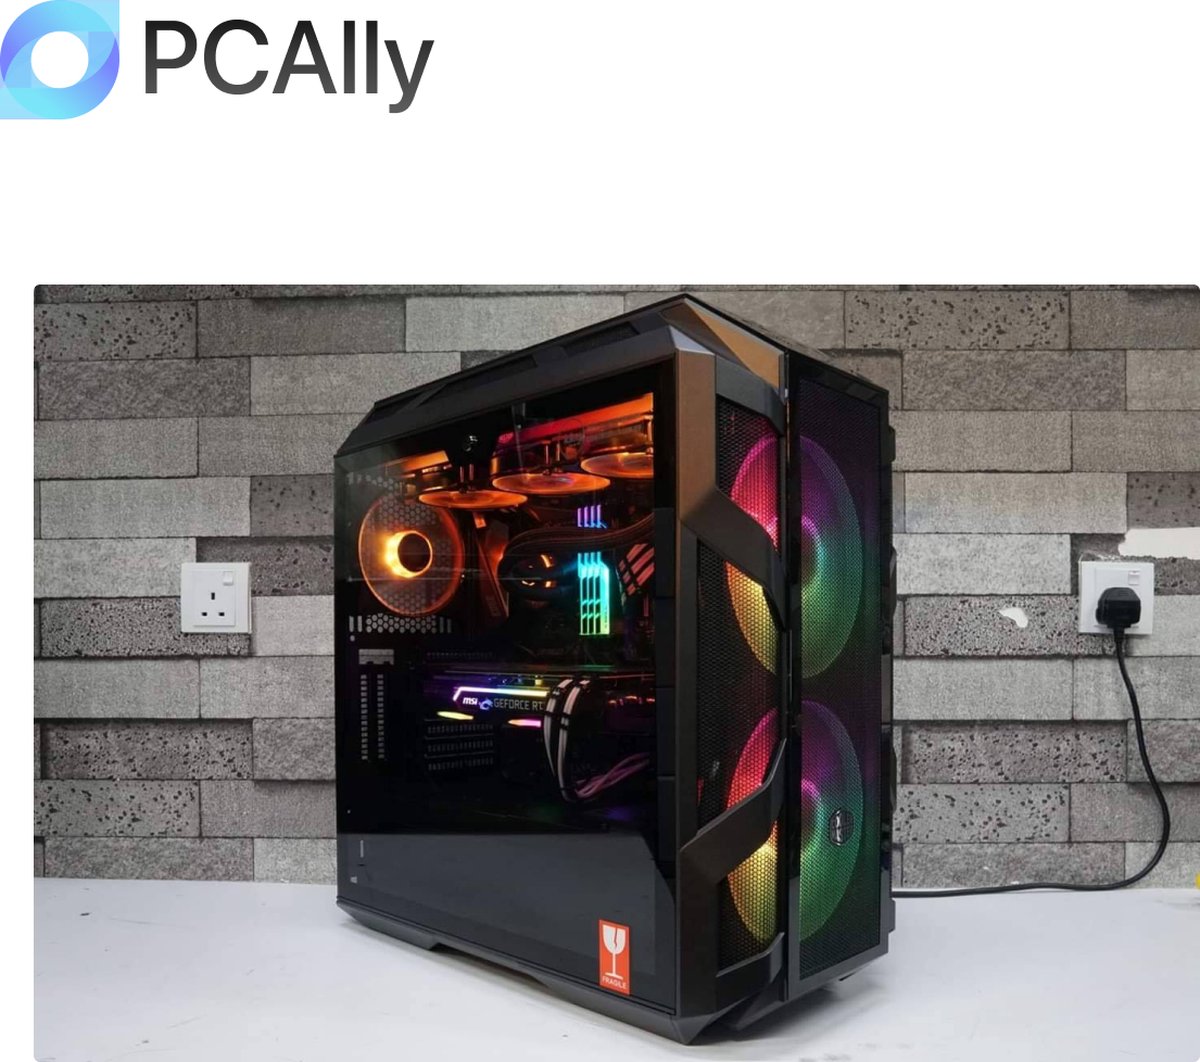 PCAlly Ultimate Cooler Master - Game PC - i9 12900K - RTX 3090 Ti - 32 GB DDR5 RAM - 7000 GB SSD - H500M